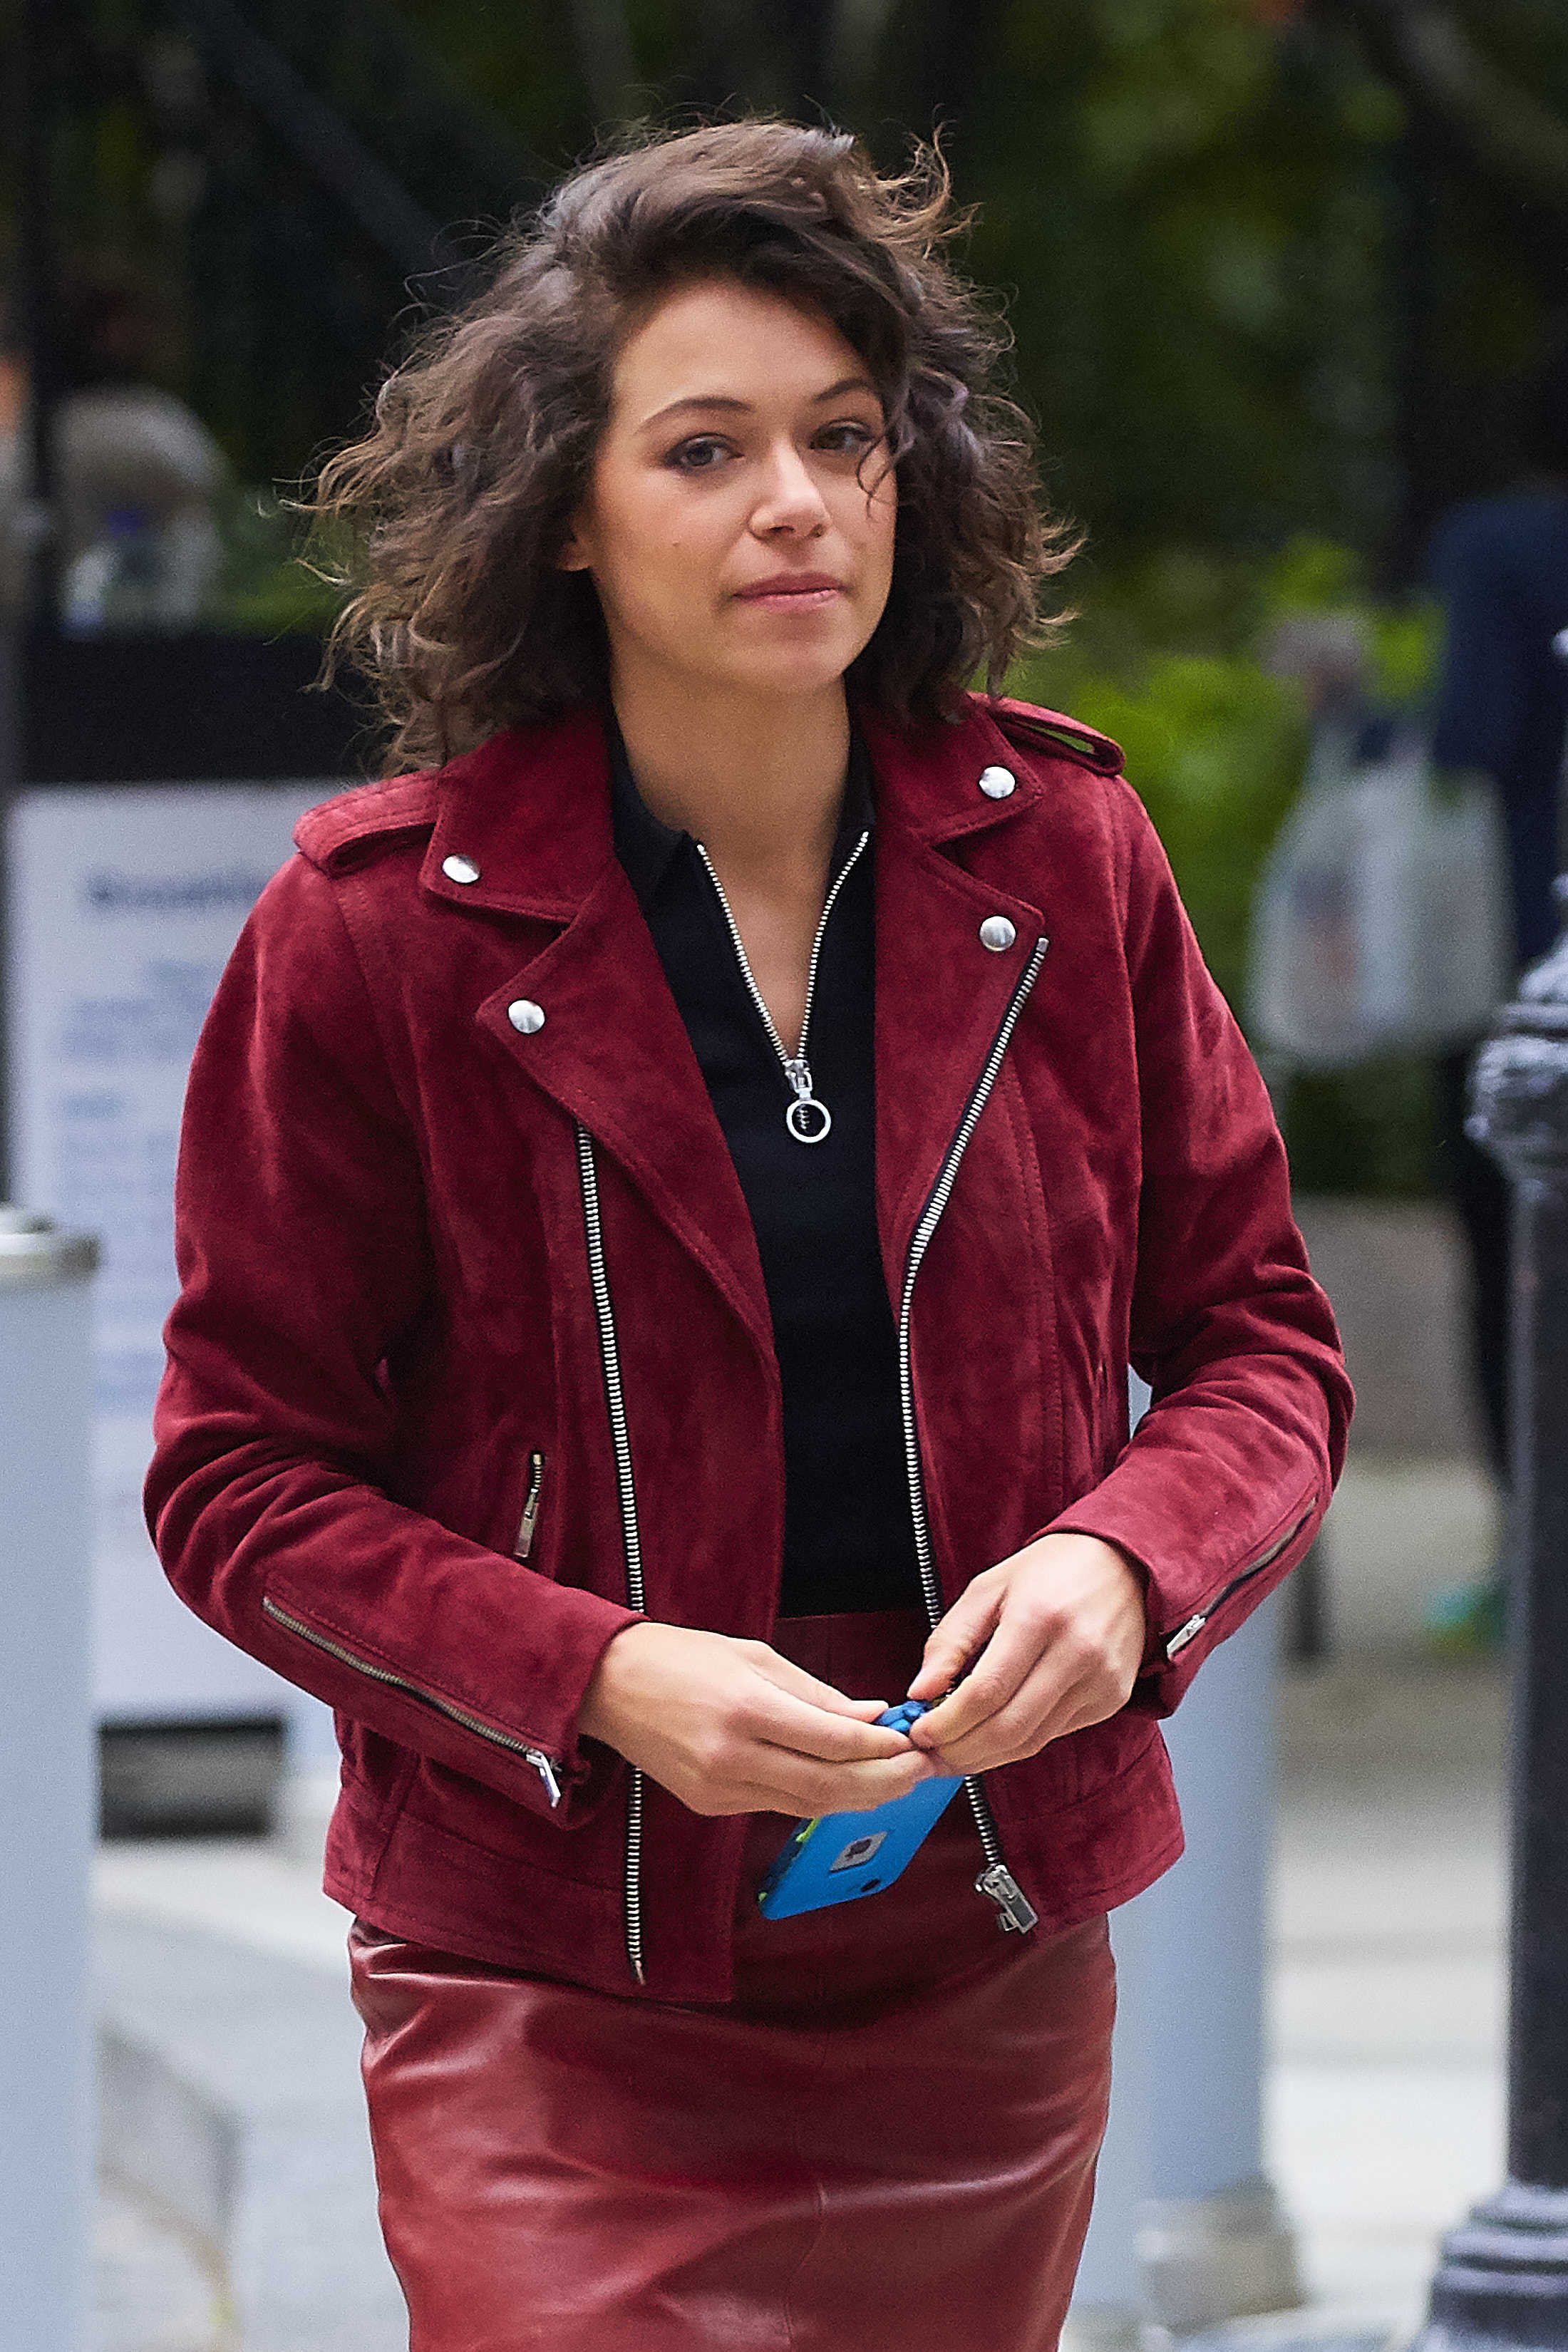 Tatiana Maslany out and about in NYC